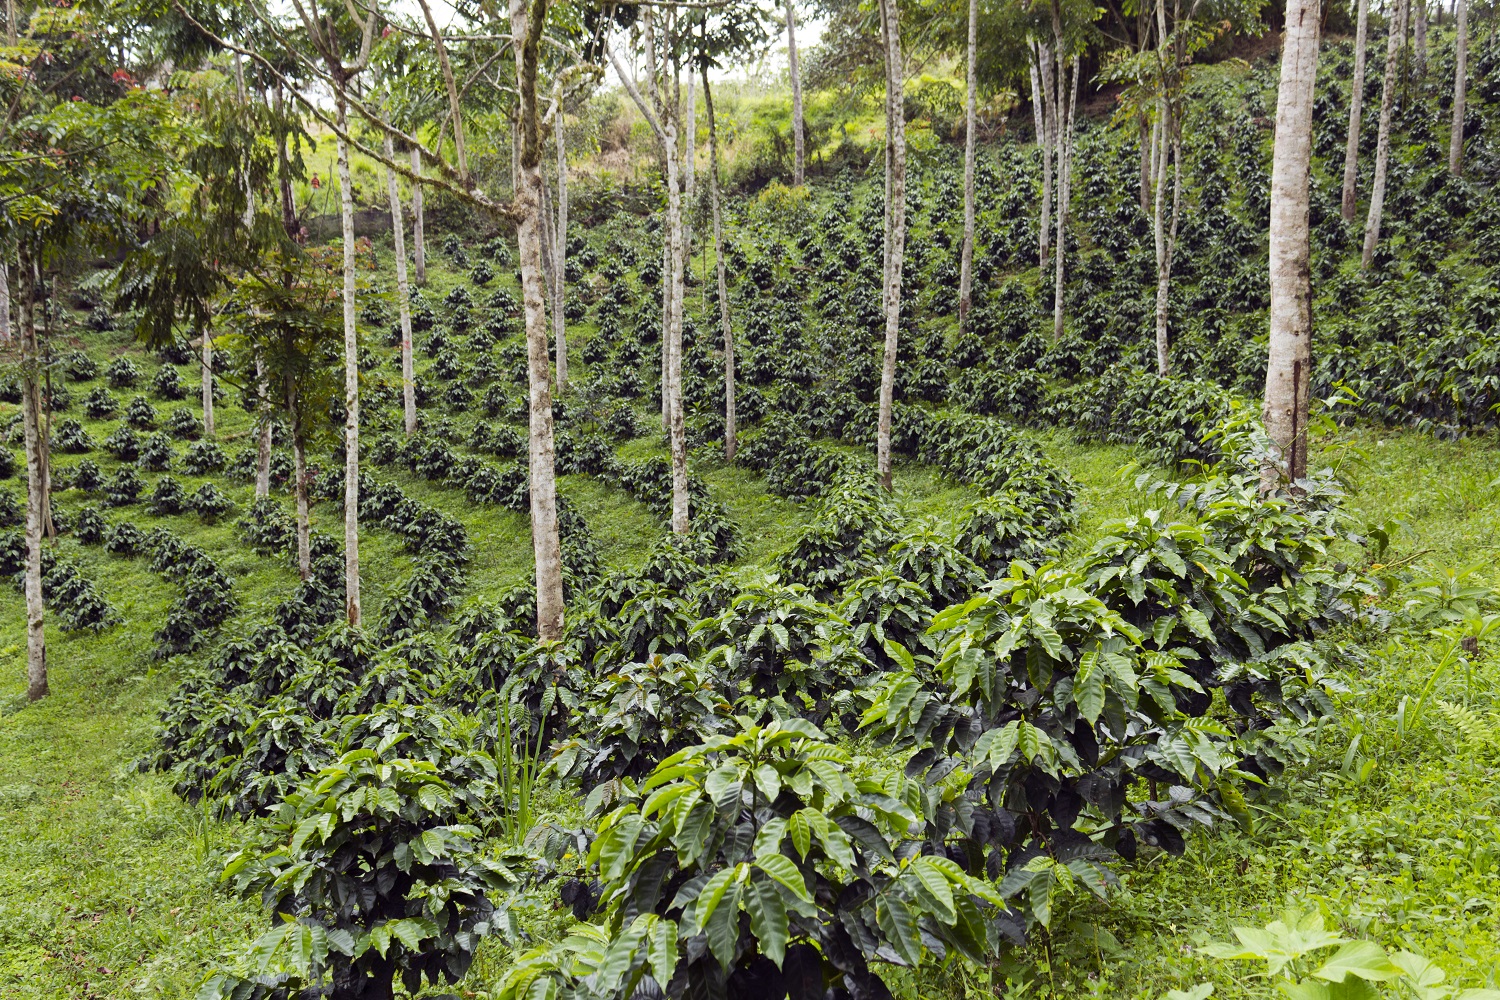 Coffee bushes in a shade-grown organic coffee plantation on the western slopes of the Andes in Ecuador